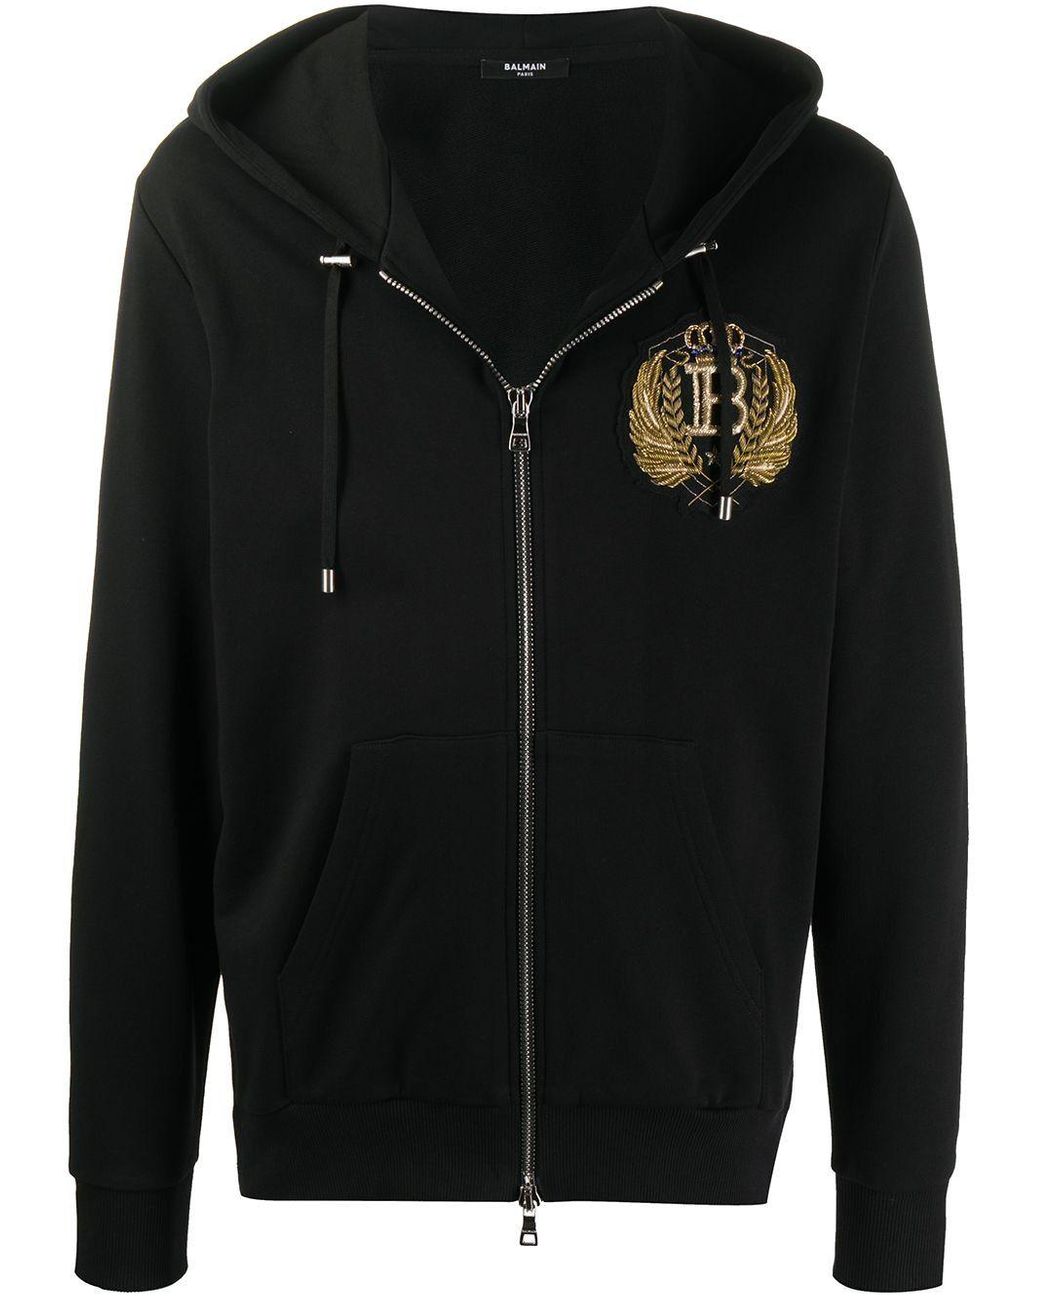 Balmain Cotton Embroidered Crest-motif Hoodie in Black for Men - Lyst